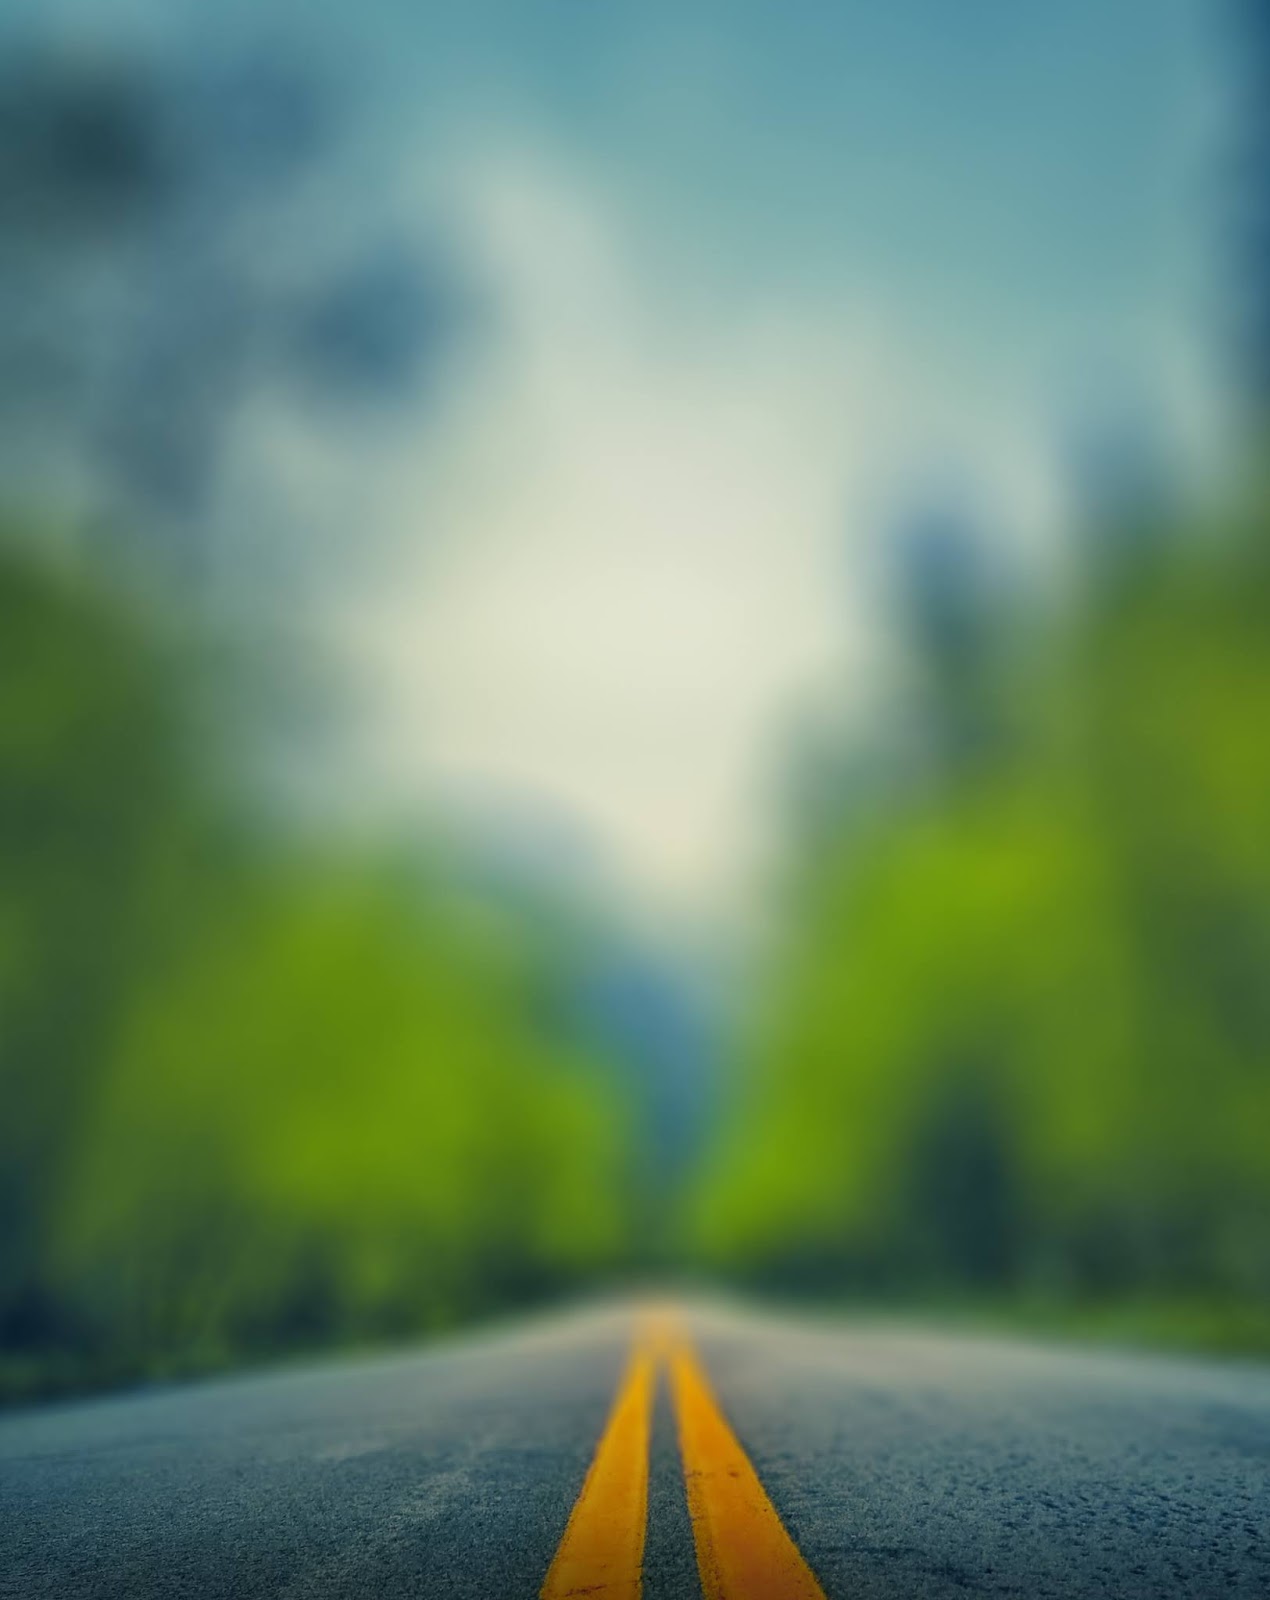 Blur Road Background With Amazing Green Tone Effect [ Download ]